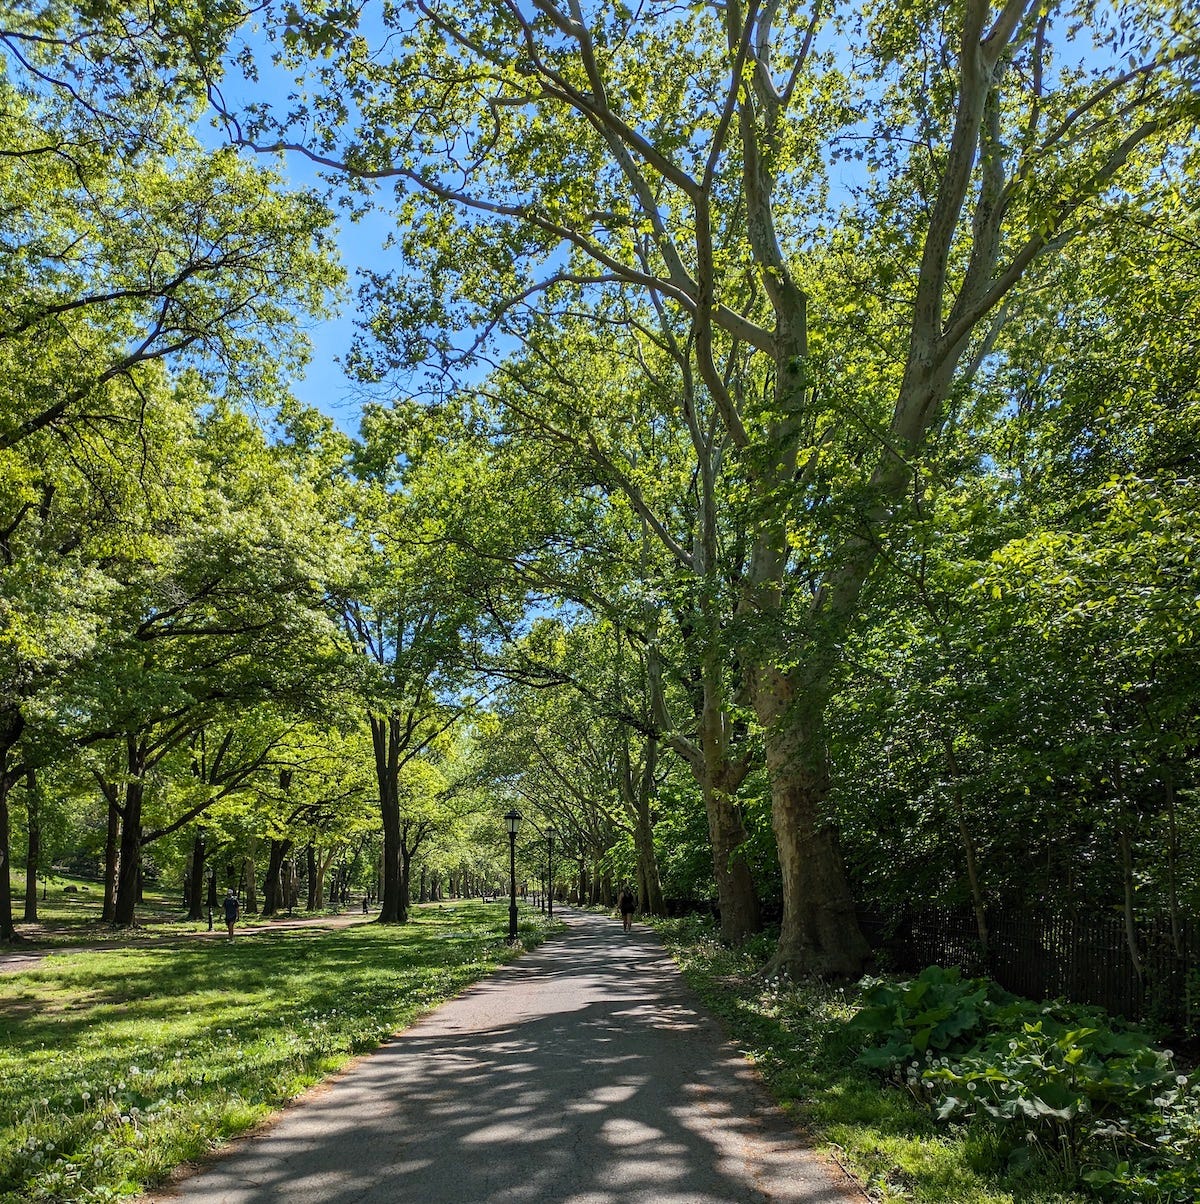 Photo of a path inside a park, with trees and grass, all very green, and a bright blue cloudless sky above.